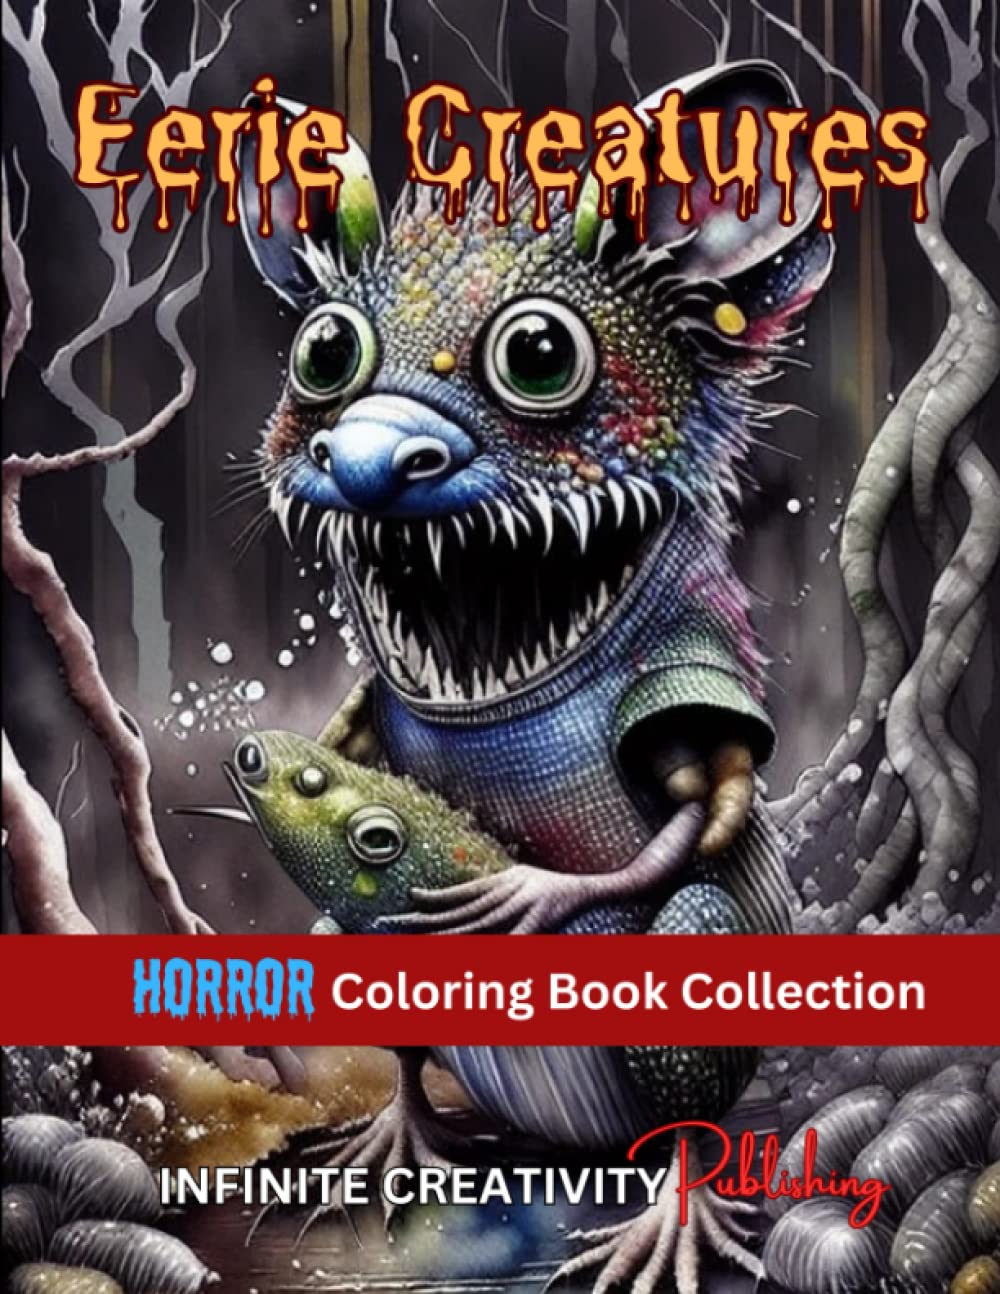 Eerie Creatures Edition - Horror Coloring Book Collection: Explore your inner need for odd world of critters, great and fun for all ages from seniors to adults to teens and children.